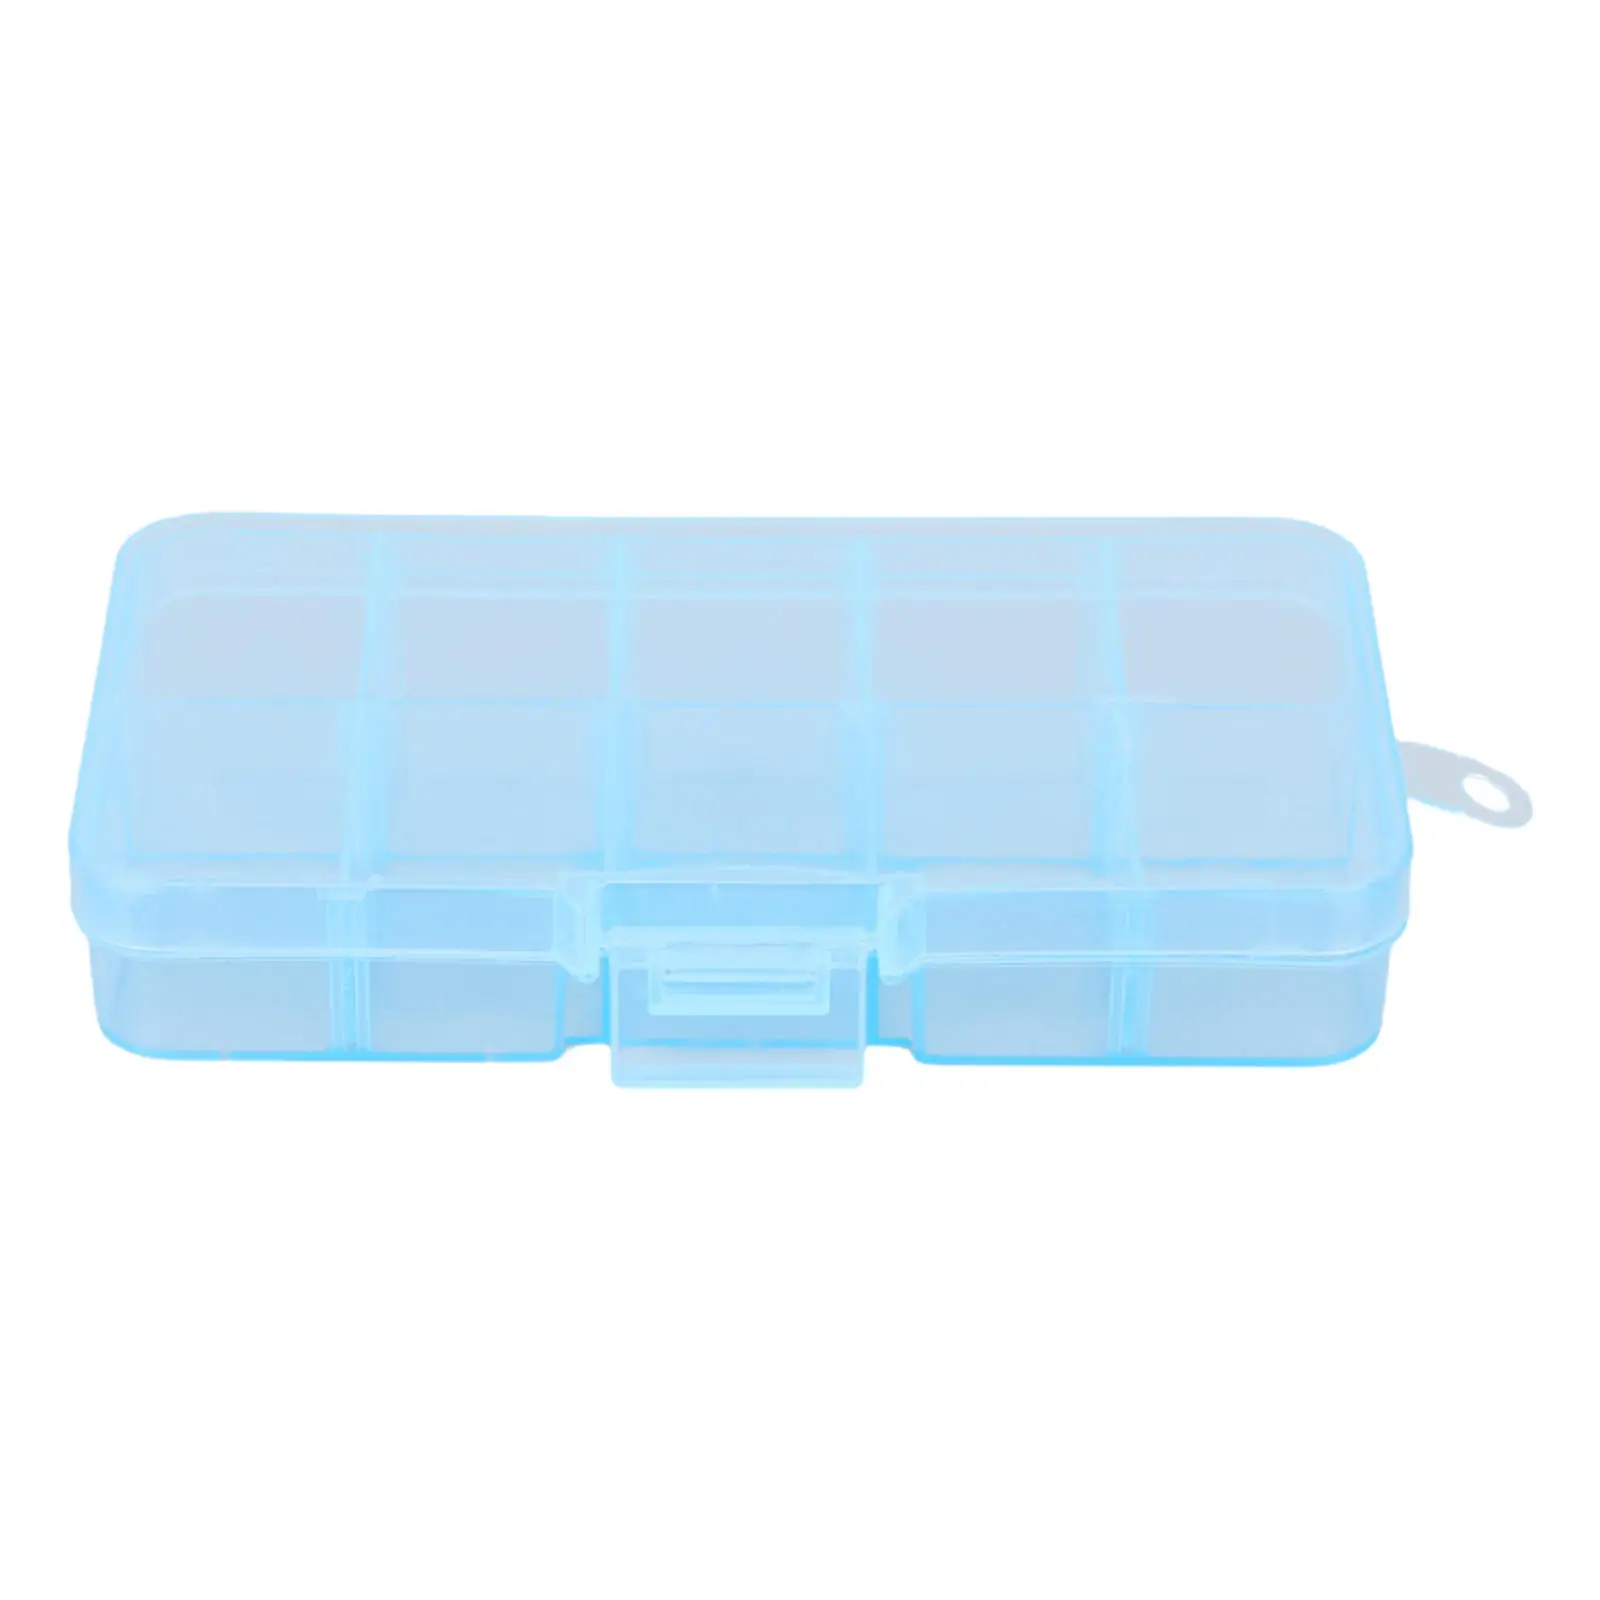 10 Slots Plastic Storage Jewelry Box Case Portable Compact Sturdy for Women